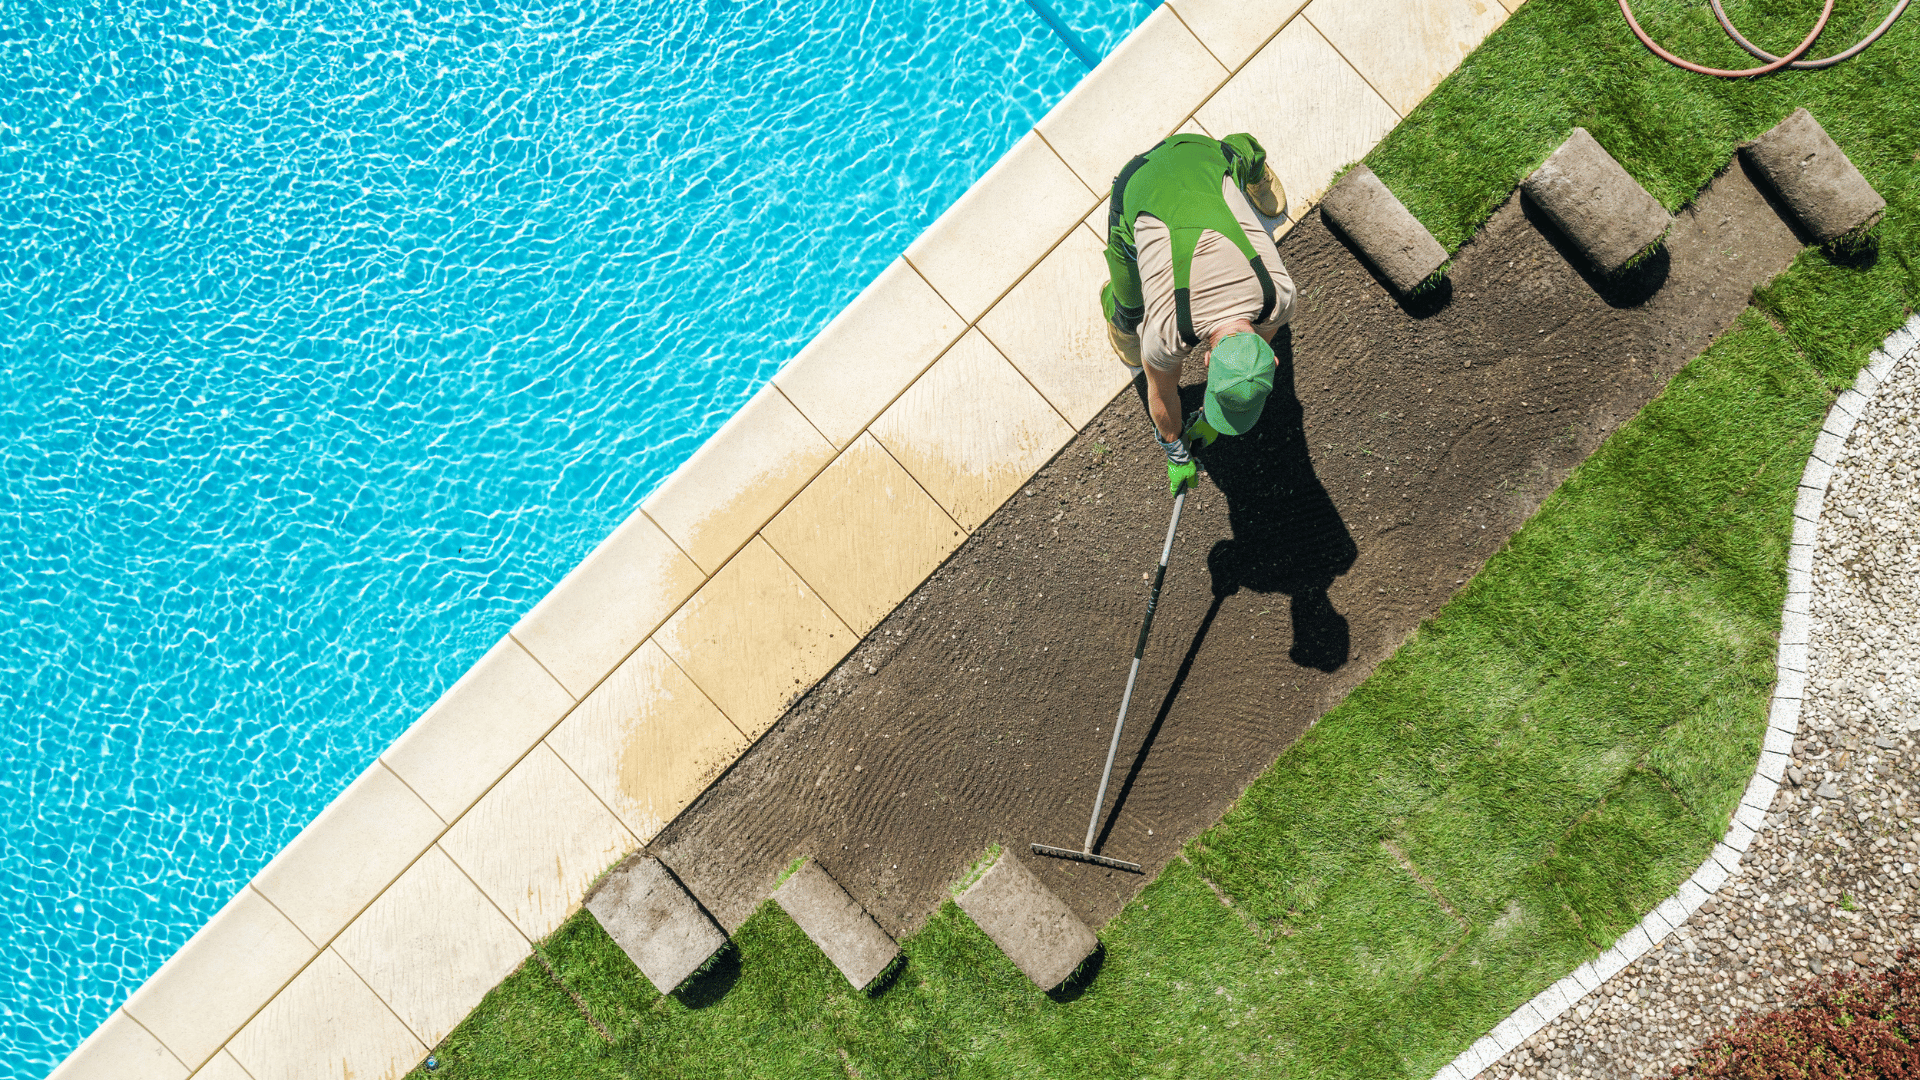 Turf 101: The best grass for around your pool